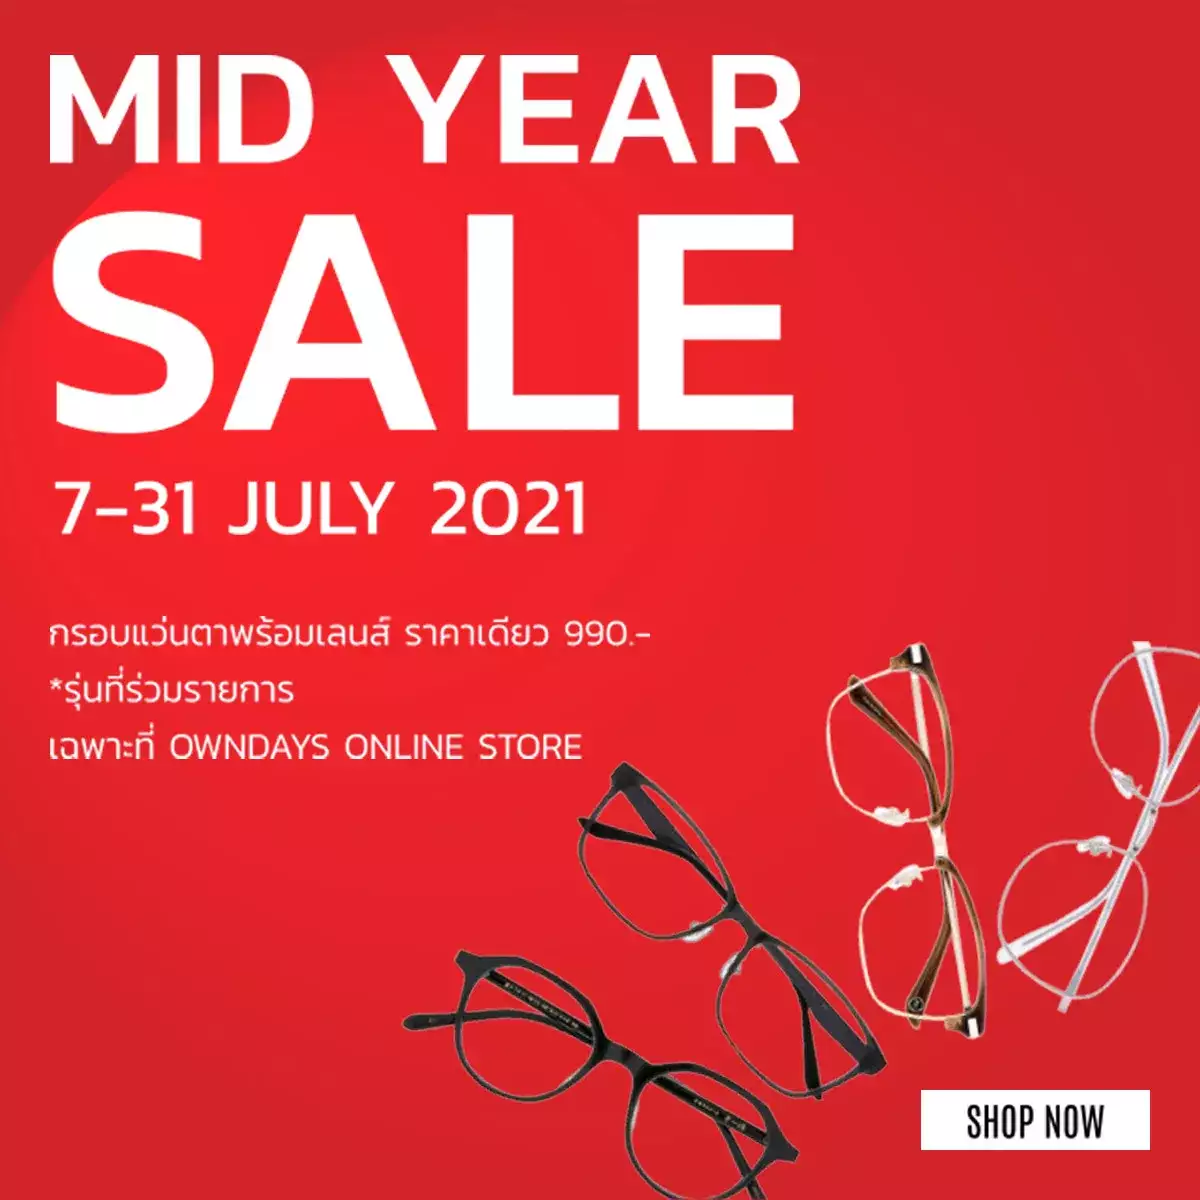 MID YEAR SALE